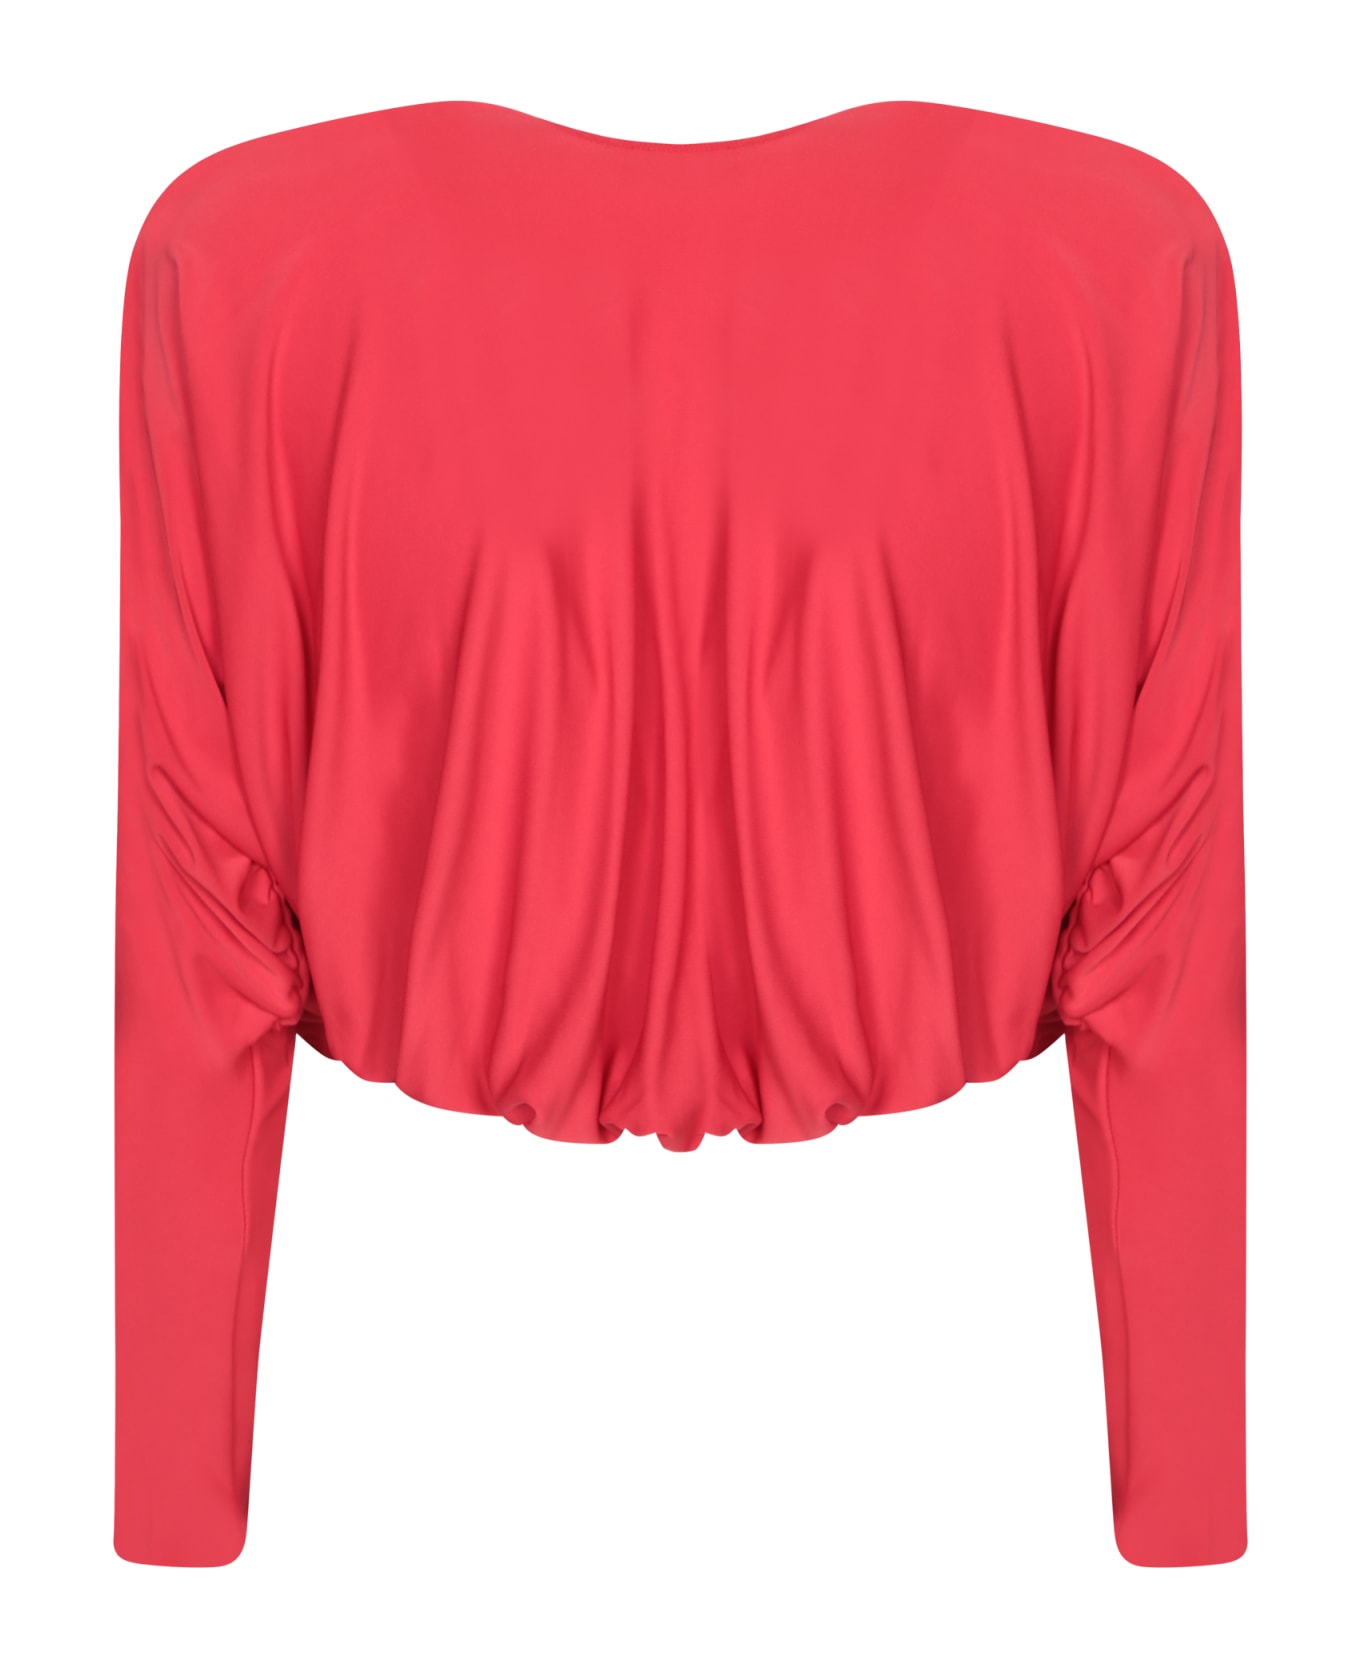 Alice + Olivia Red Cropped Twist Blouse Alice + Olivia - Red